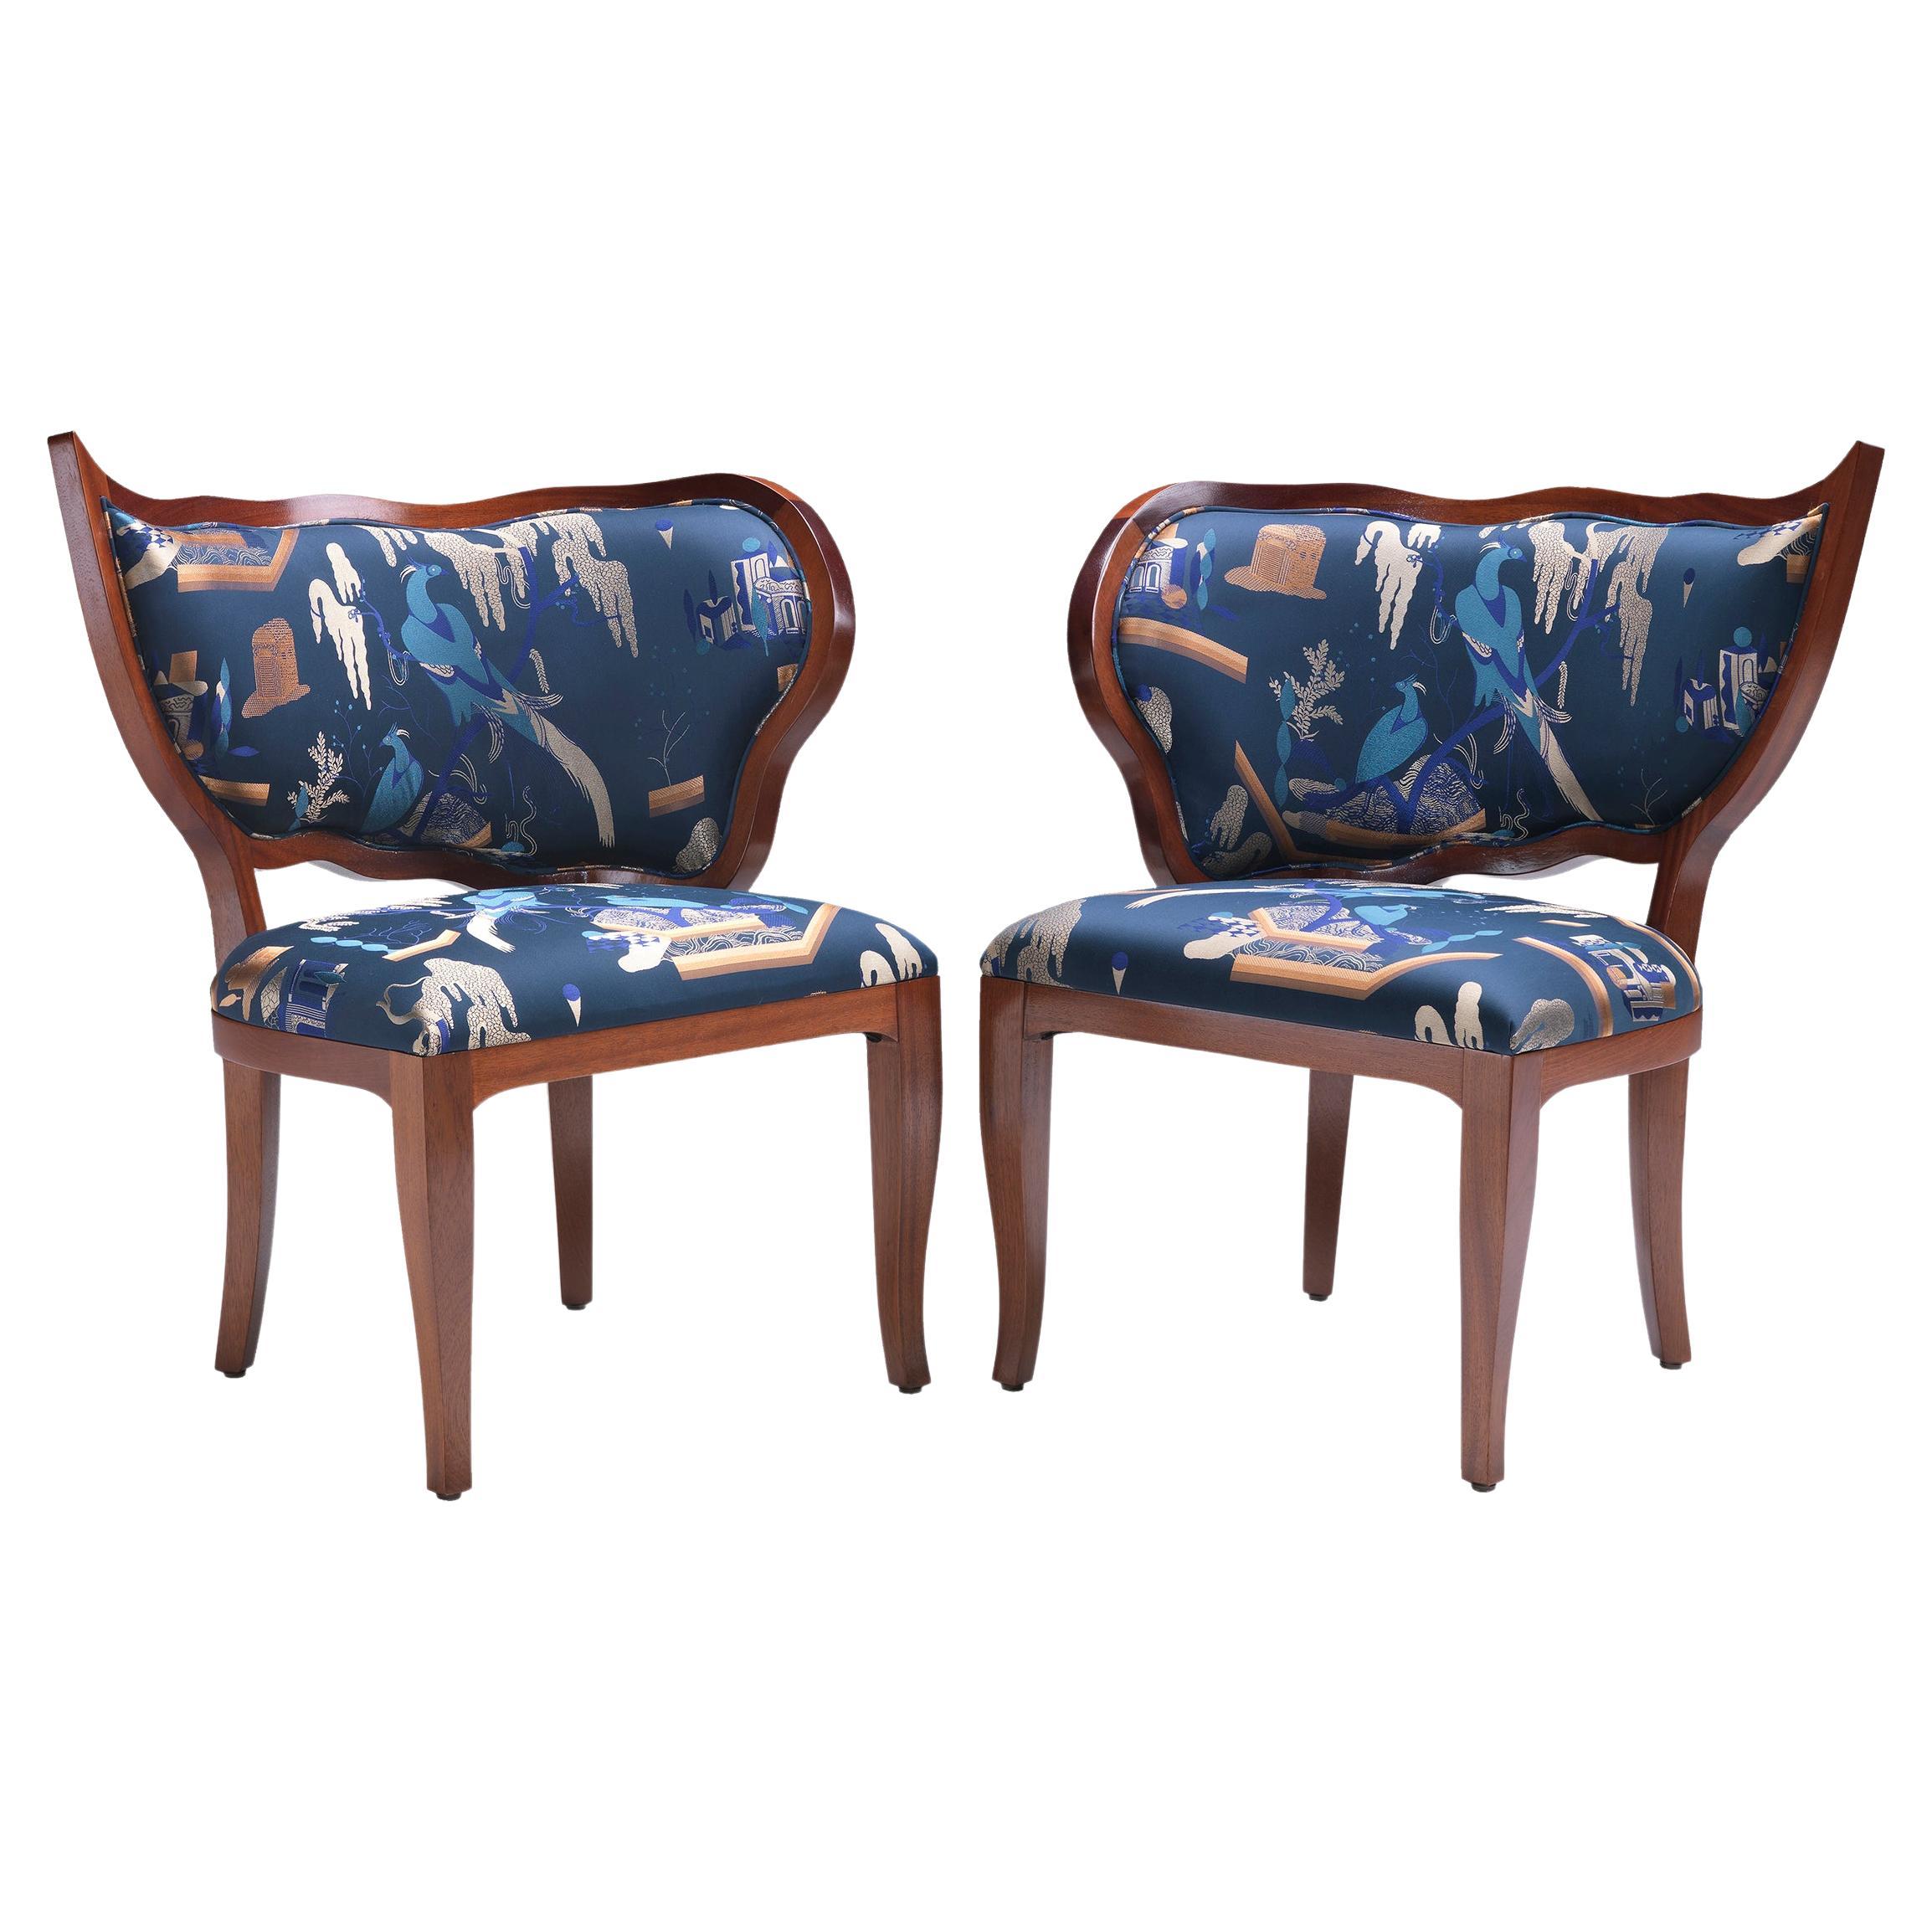 CIUFFO Dining chairs with blue parrots padded seat and back solid mahogany wood For Sale